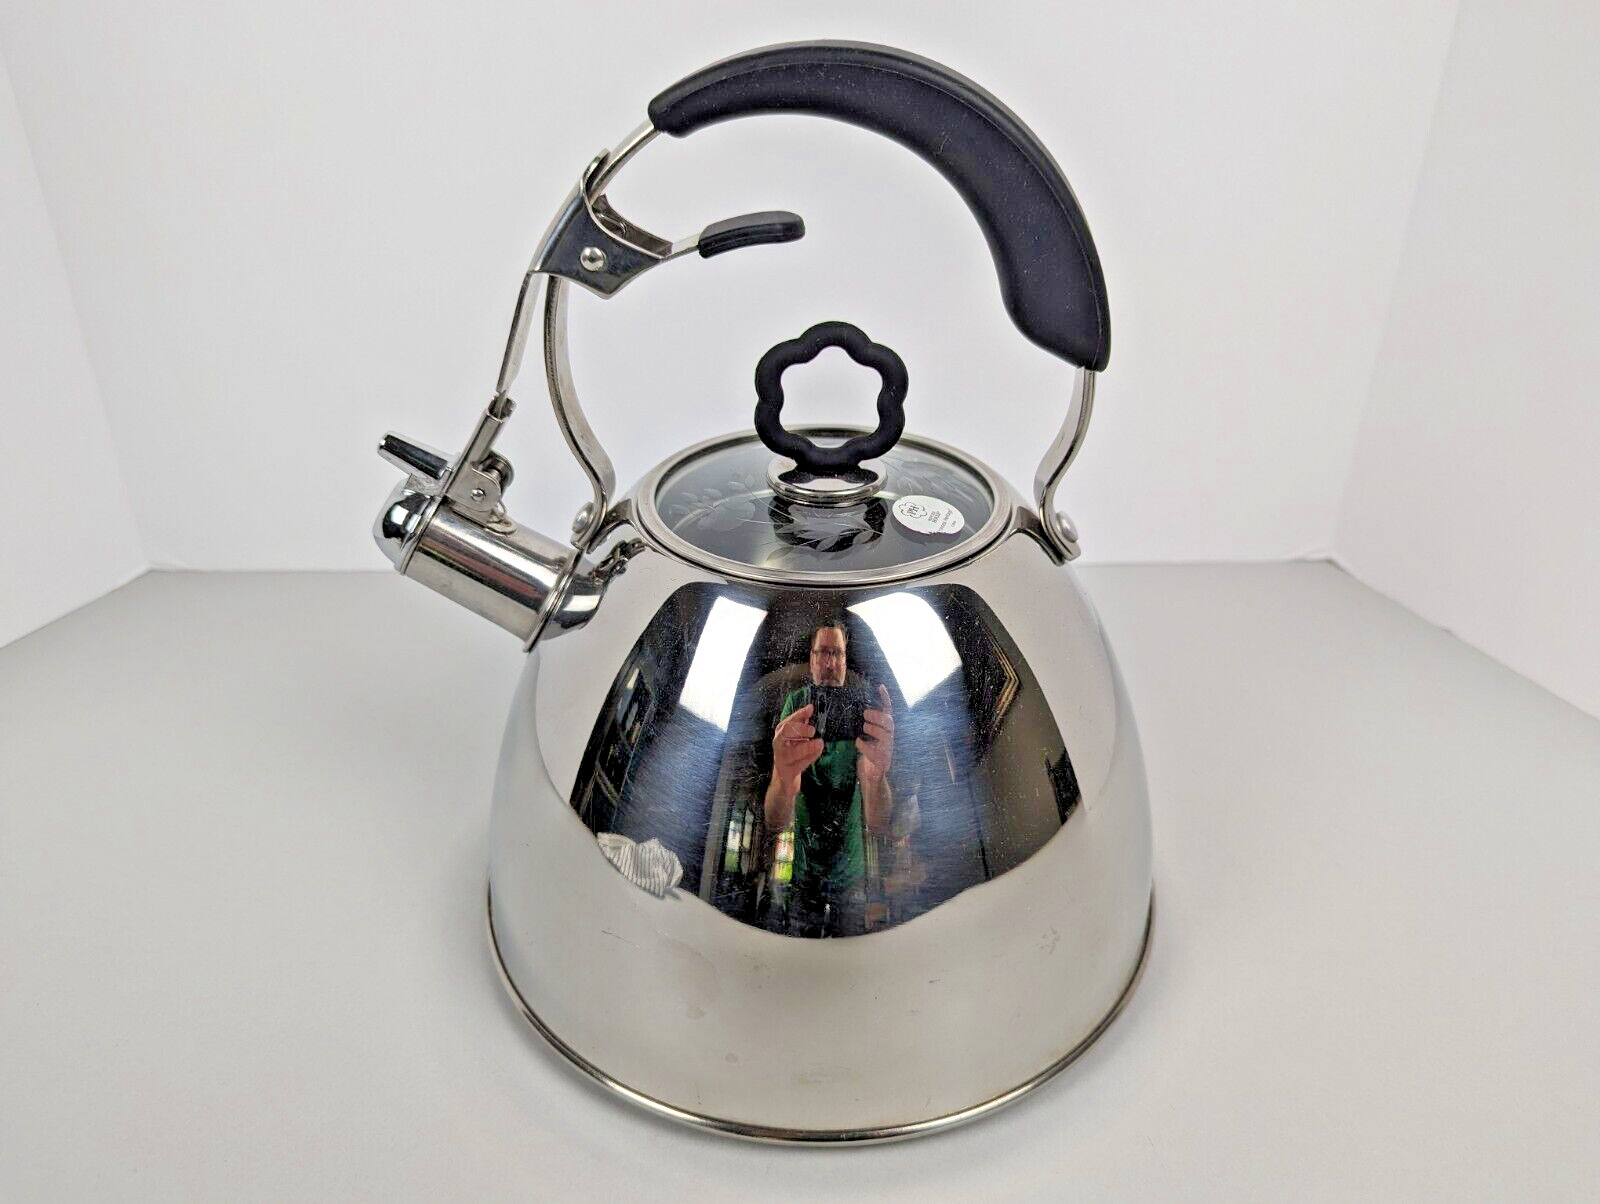 Princess House Heritage Stainless Steel Whistling Tea Kettle Teapot 2.5 Qt #6892